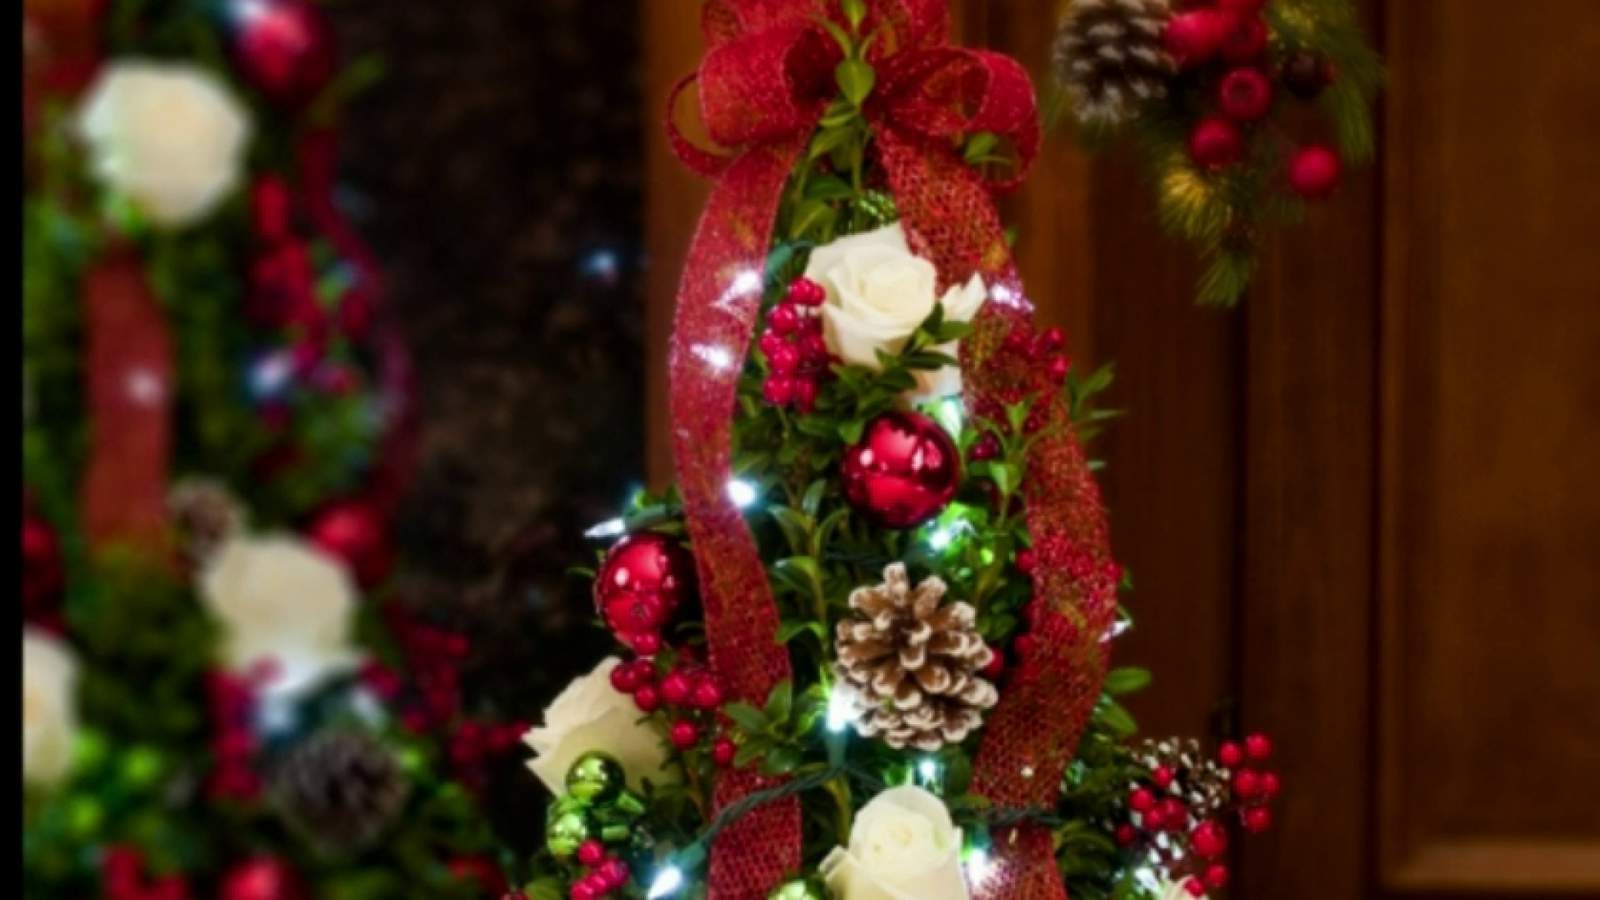 How to make your home merry and bright with a beautiful floral arrangement